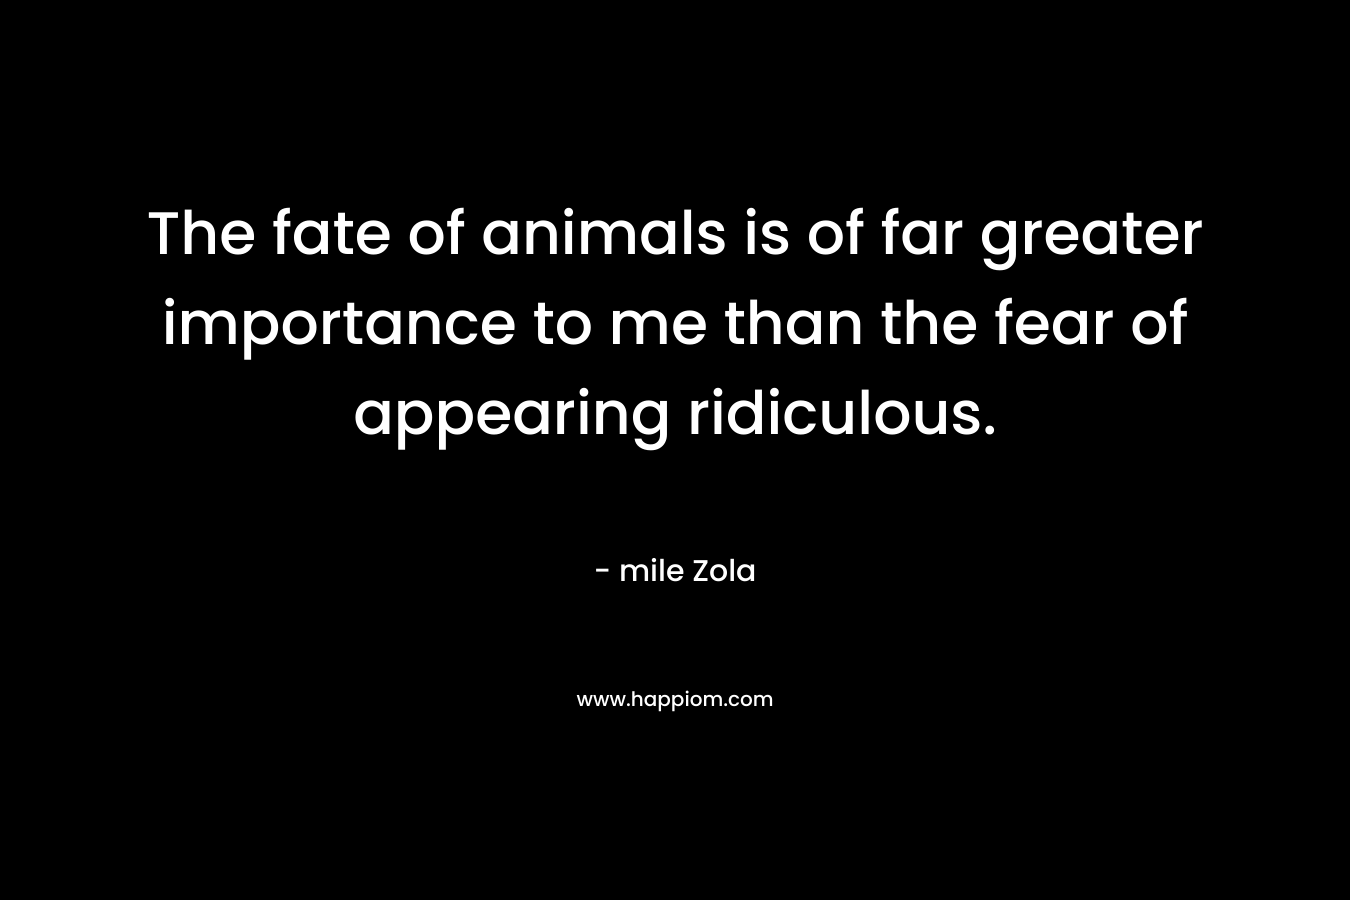 The fate of animals is of far greater importance to me than the fear of appearing ridiculous.